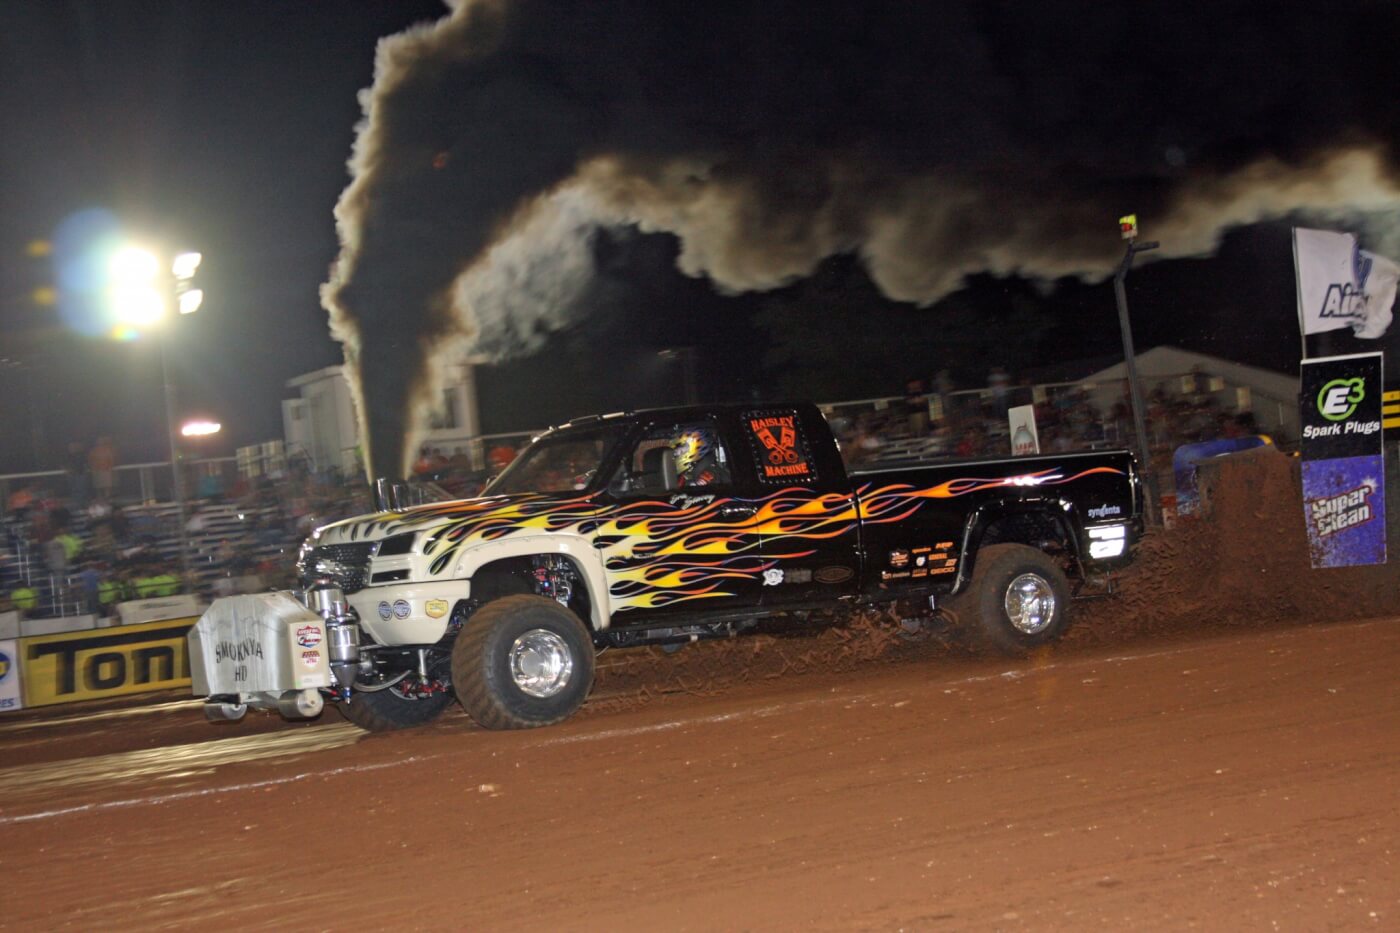 Eric Stacey was the only puller in the Super Stock Class to break the 300-foot barrier Saturday night, taking the win in Smokinya HD.